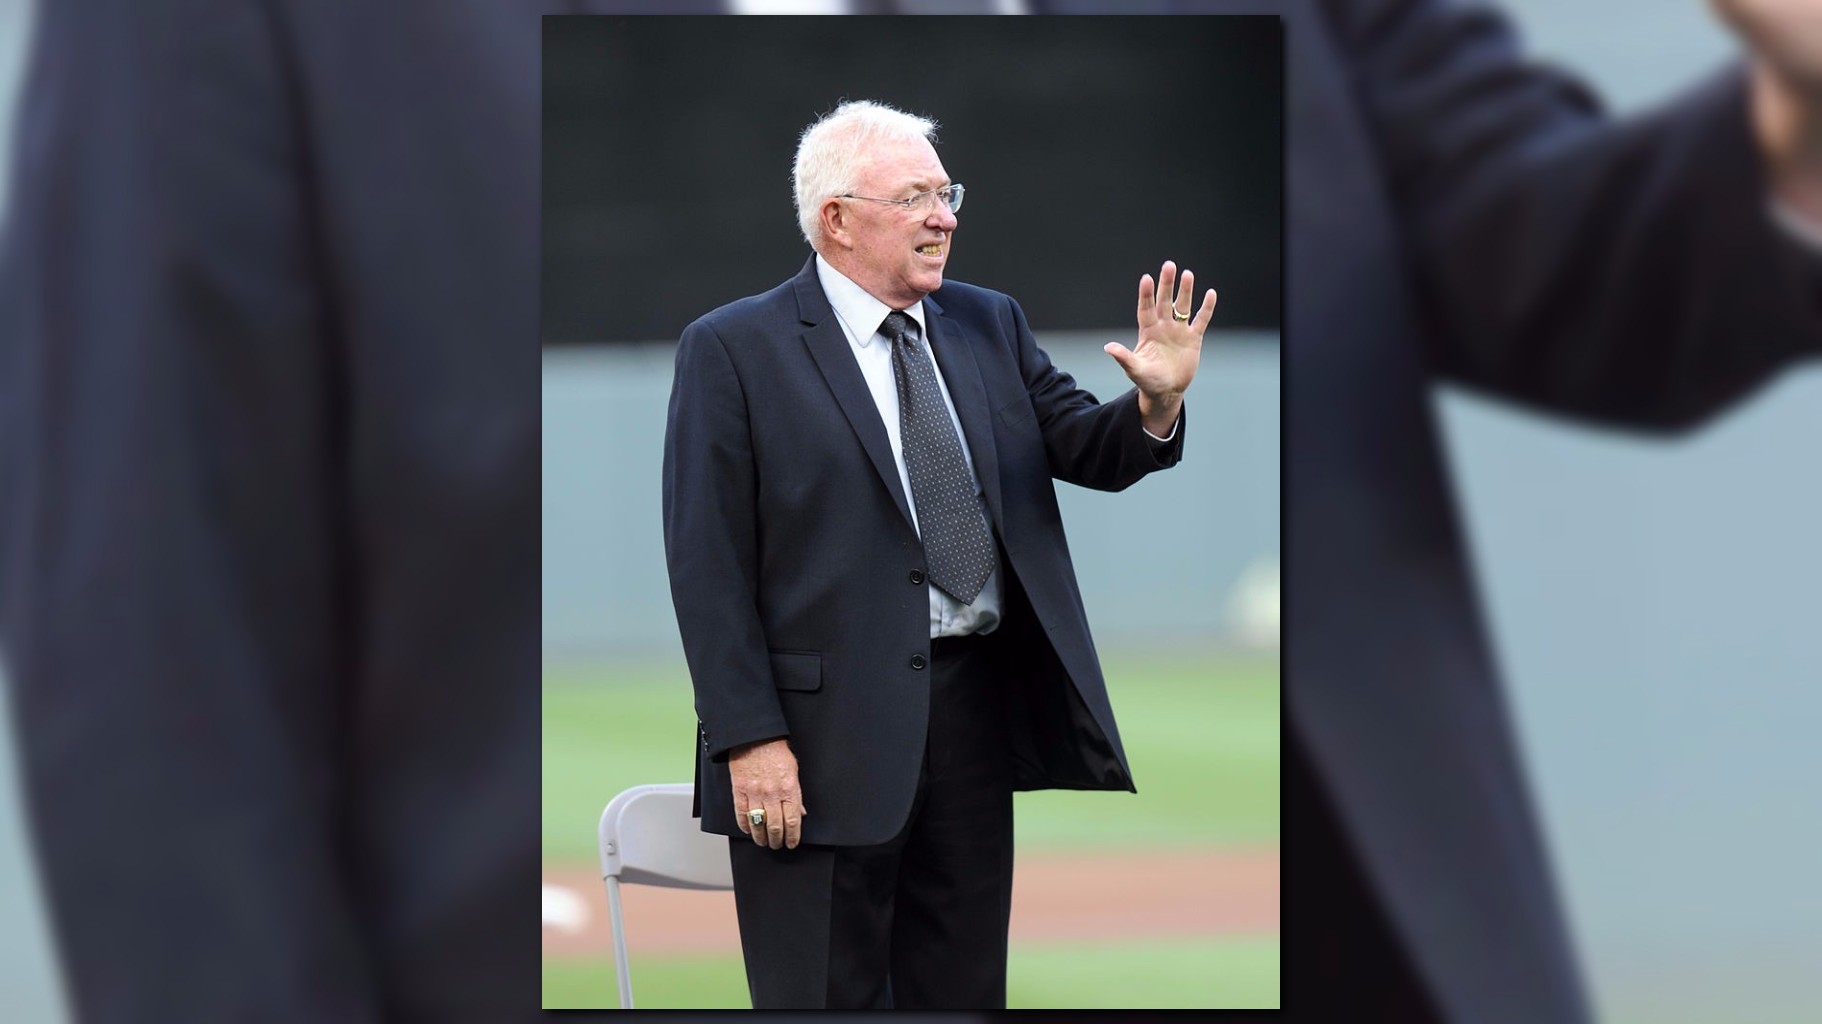 Minnesota Twins and Target Field to unveil a Tom Kelly statue on